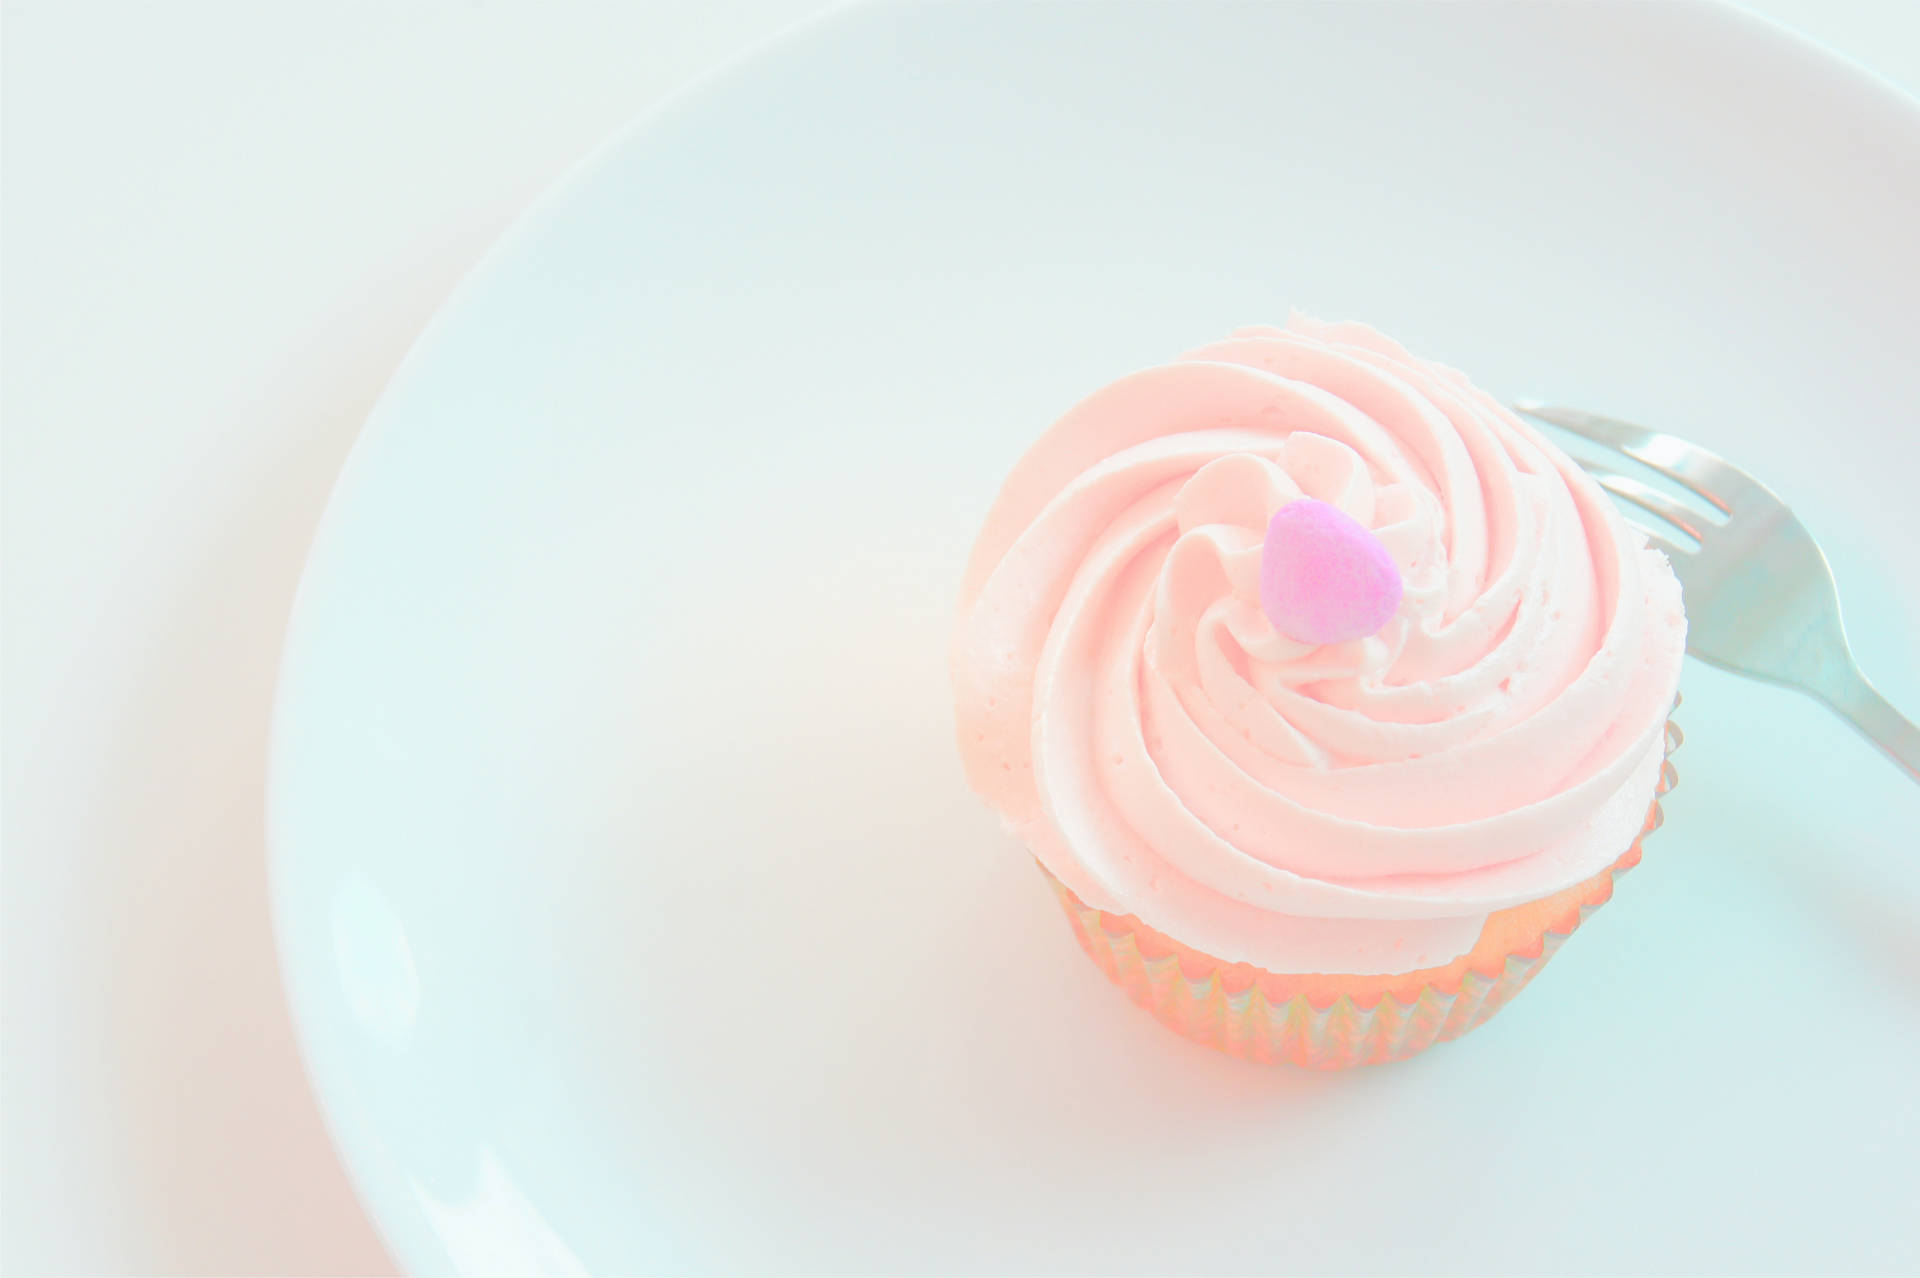 Pastel 4592X3056 Wallpaper and Background Image